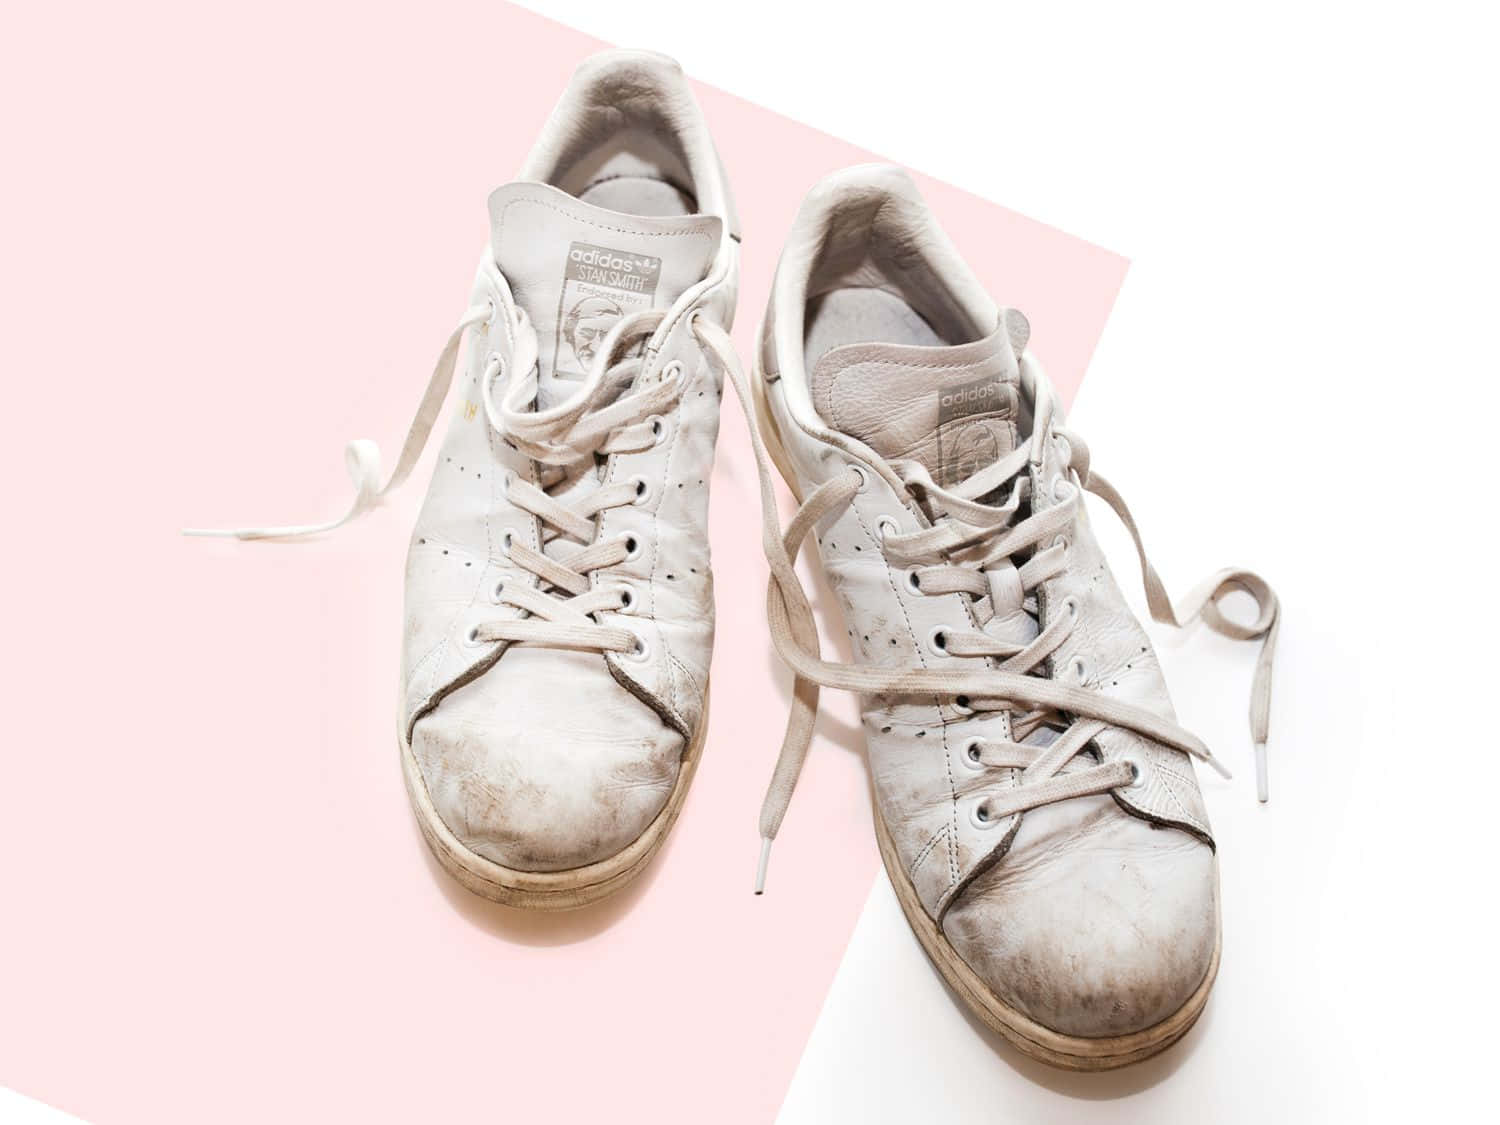 a pair of white sneakers on a pink background